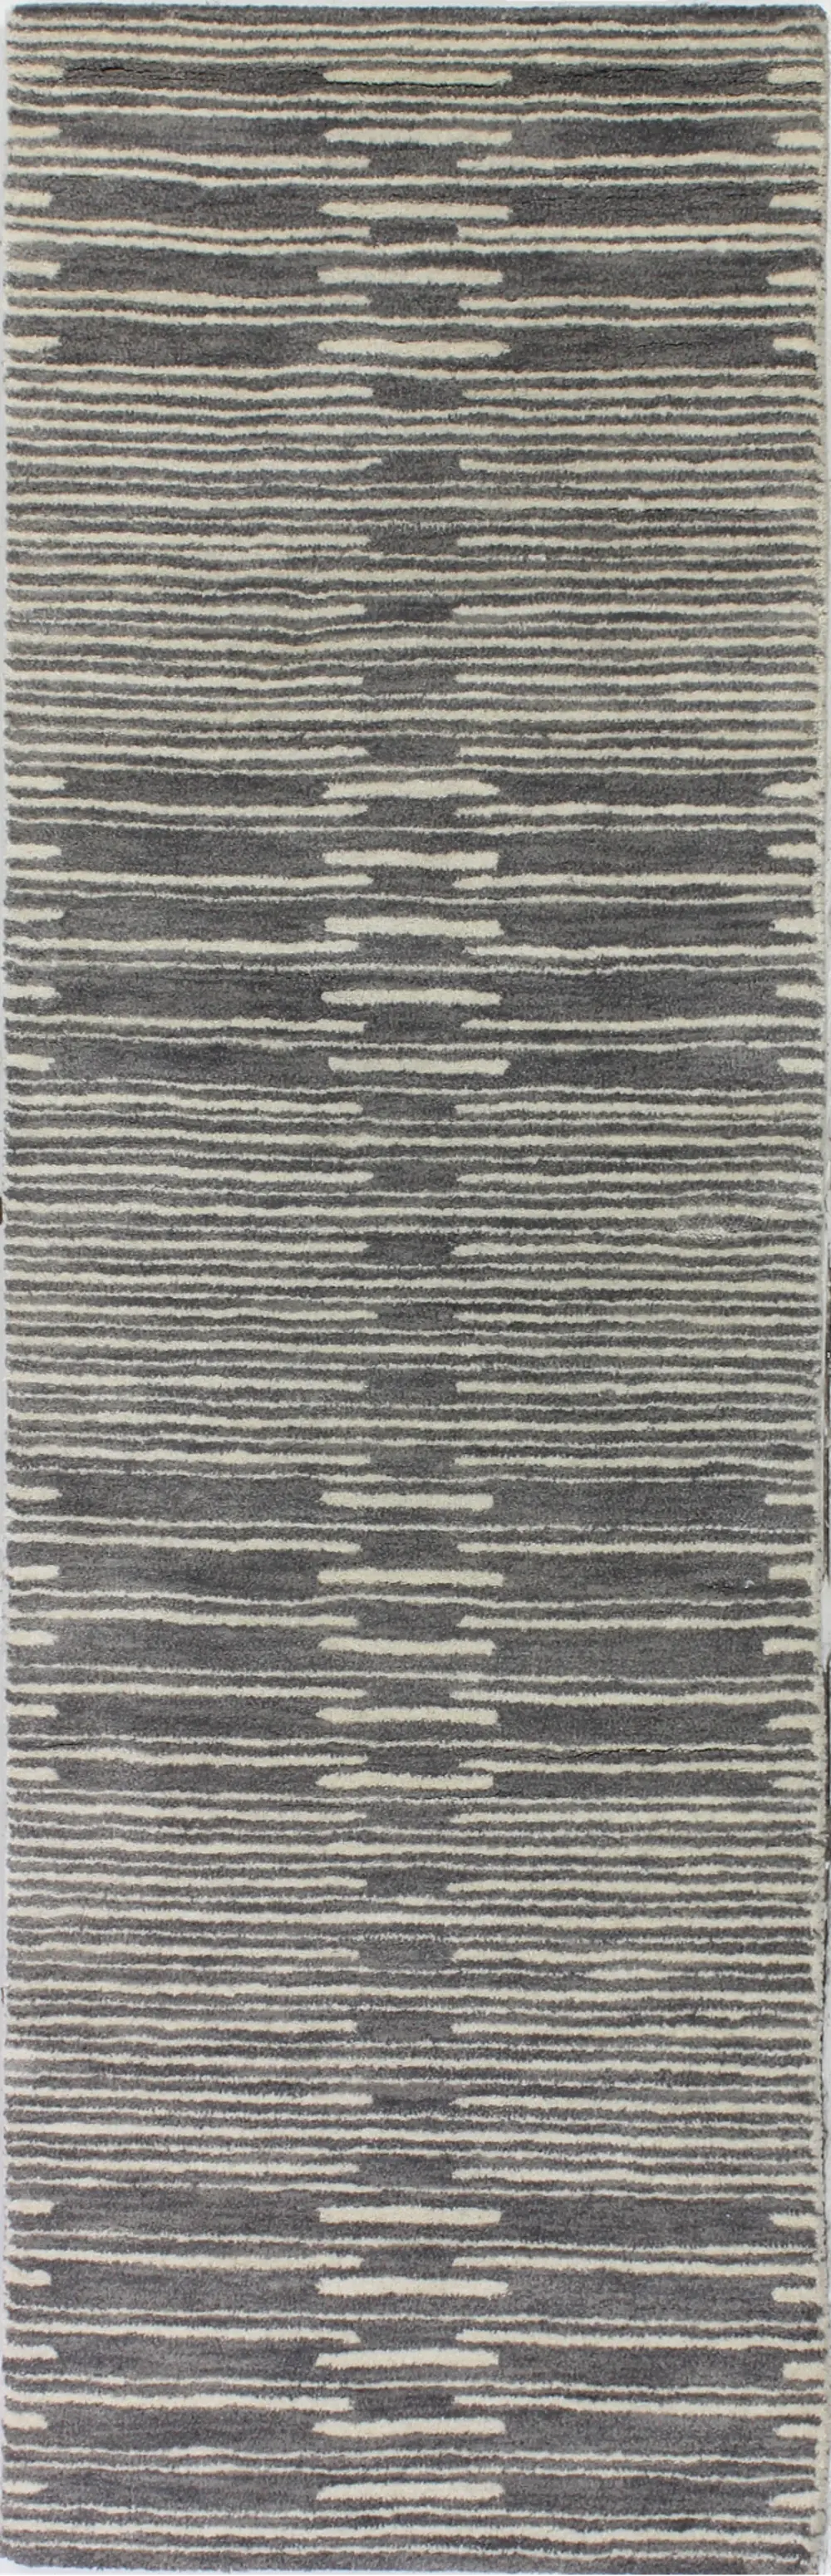 S185-GY-2.6X8-ST264 Contemporary Princeton Gray 8 Foot Runner Rug - Chelsea-1